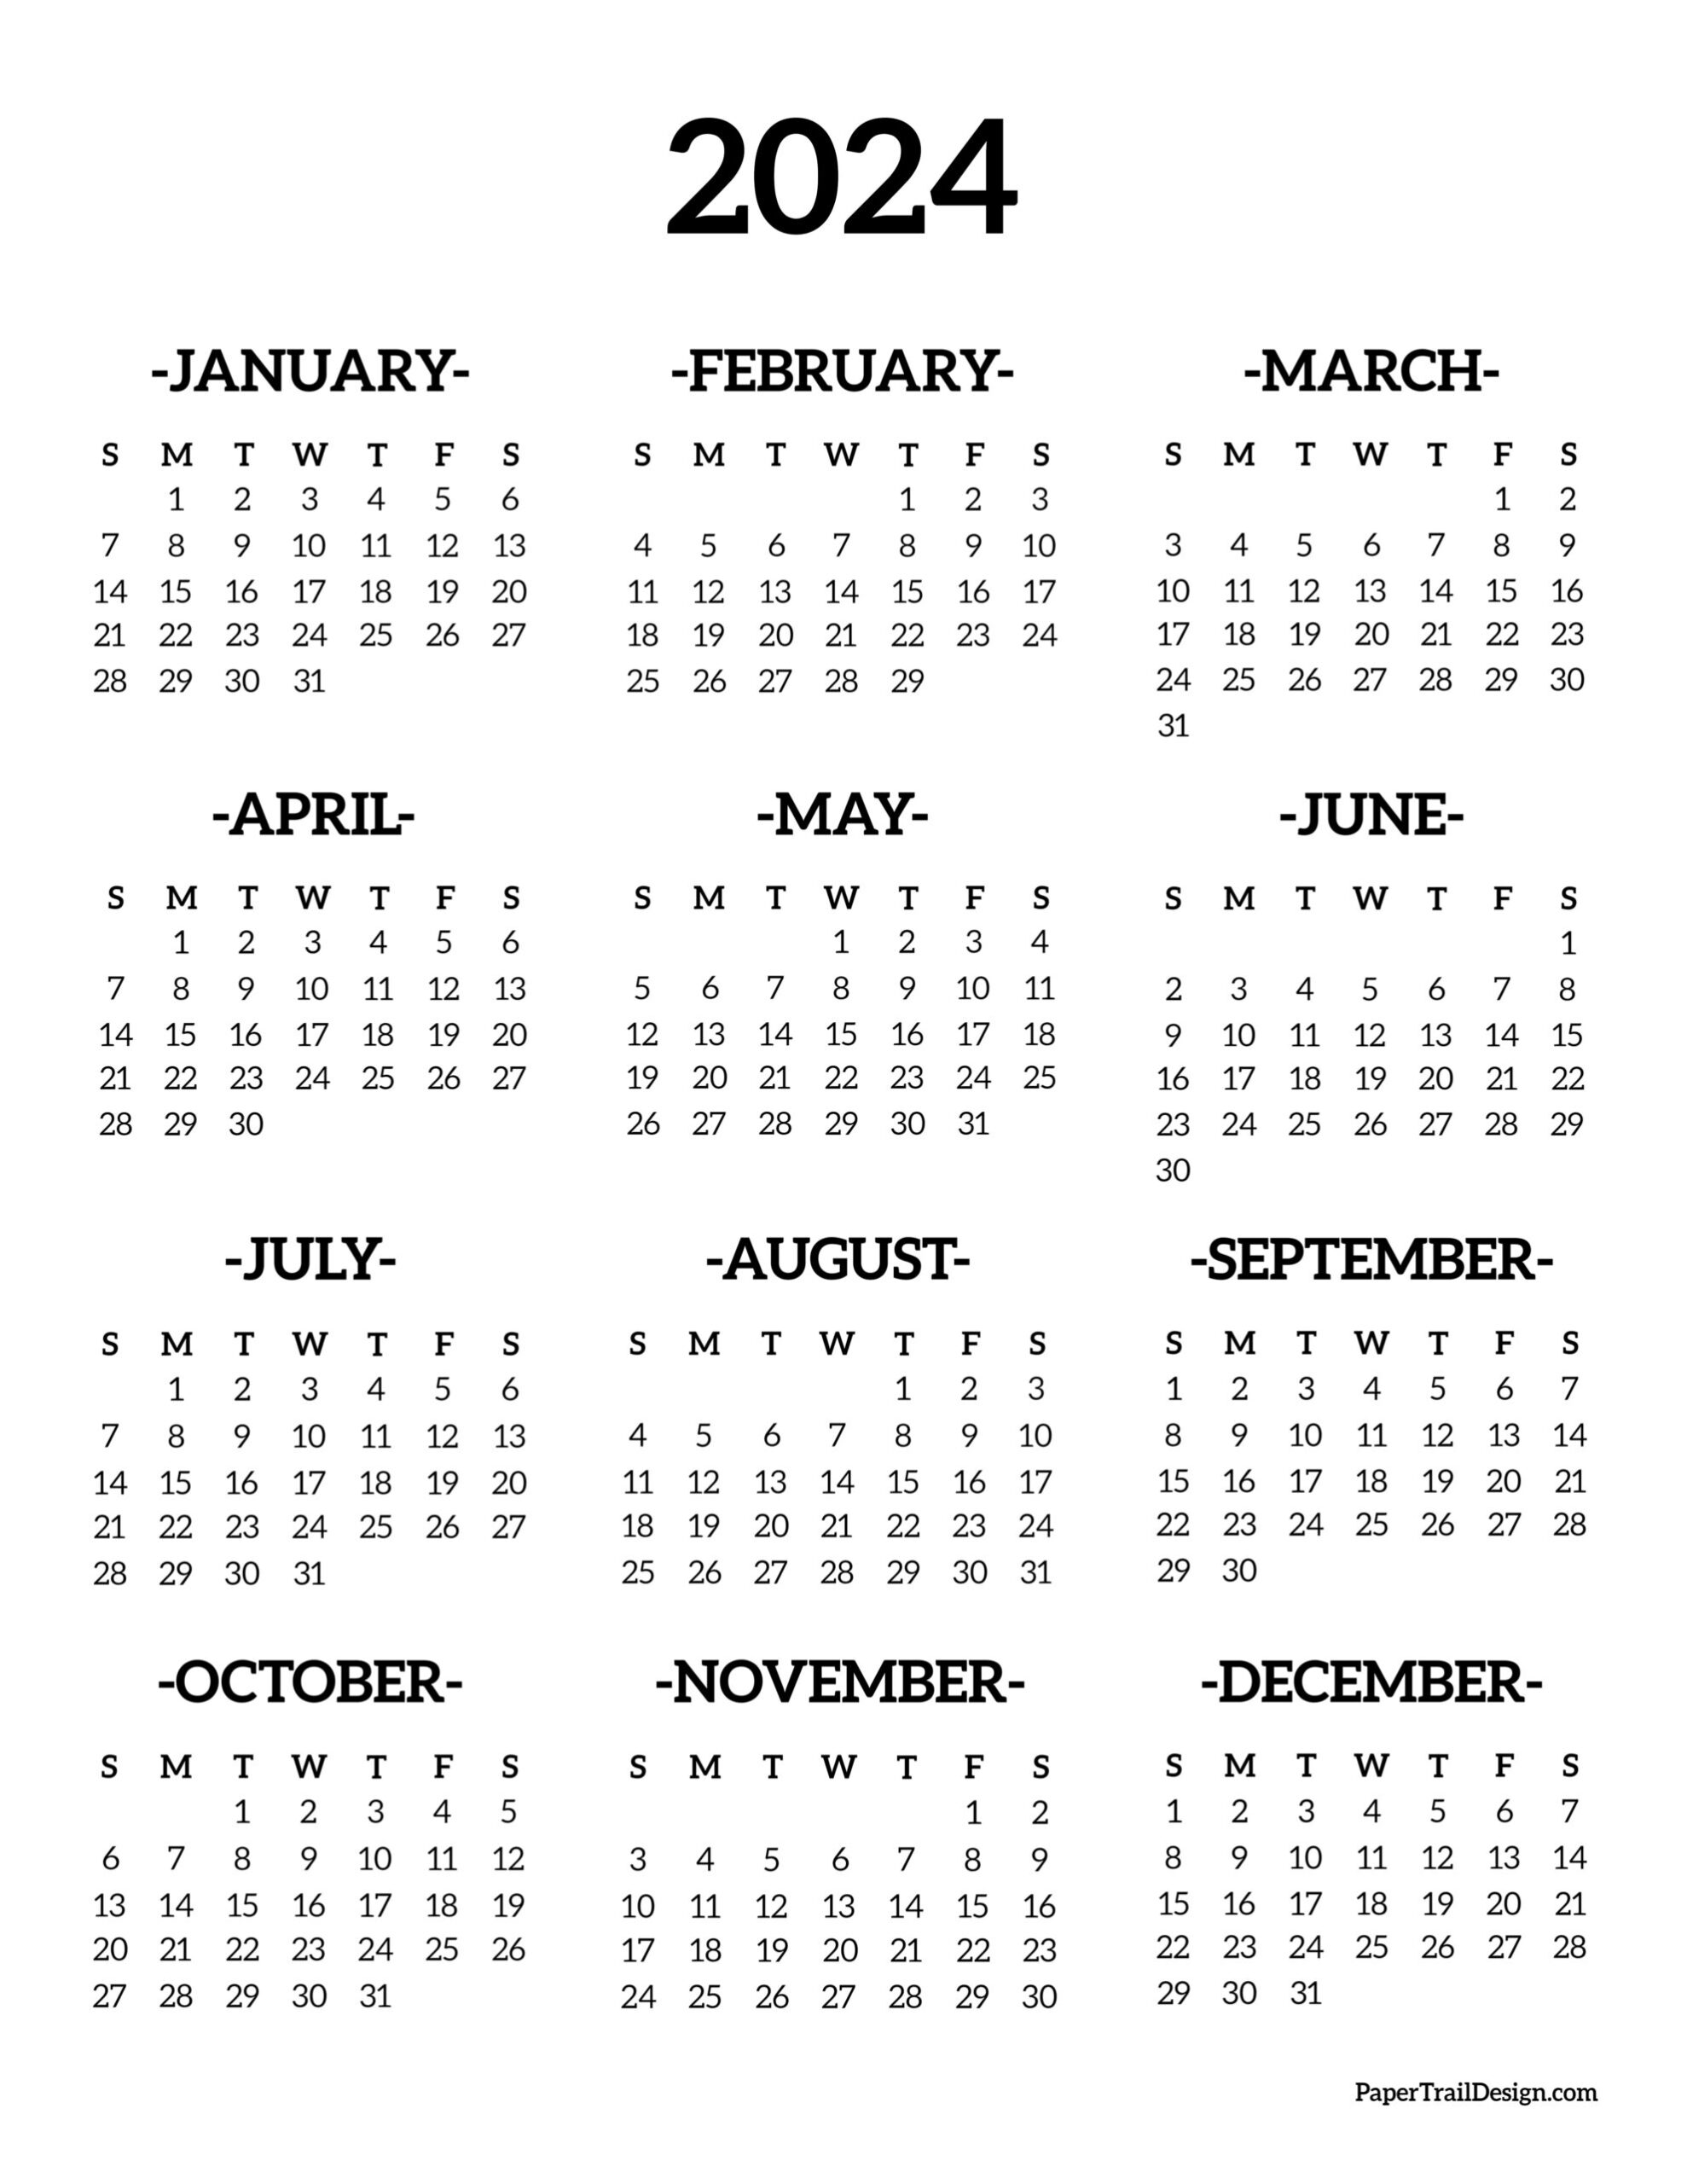 Calendar 2024 Printable One Page - Paper Trail Design for Printable Calendar 2024 Full Year